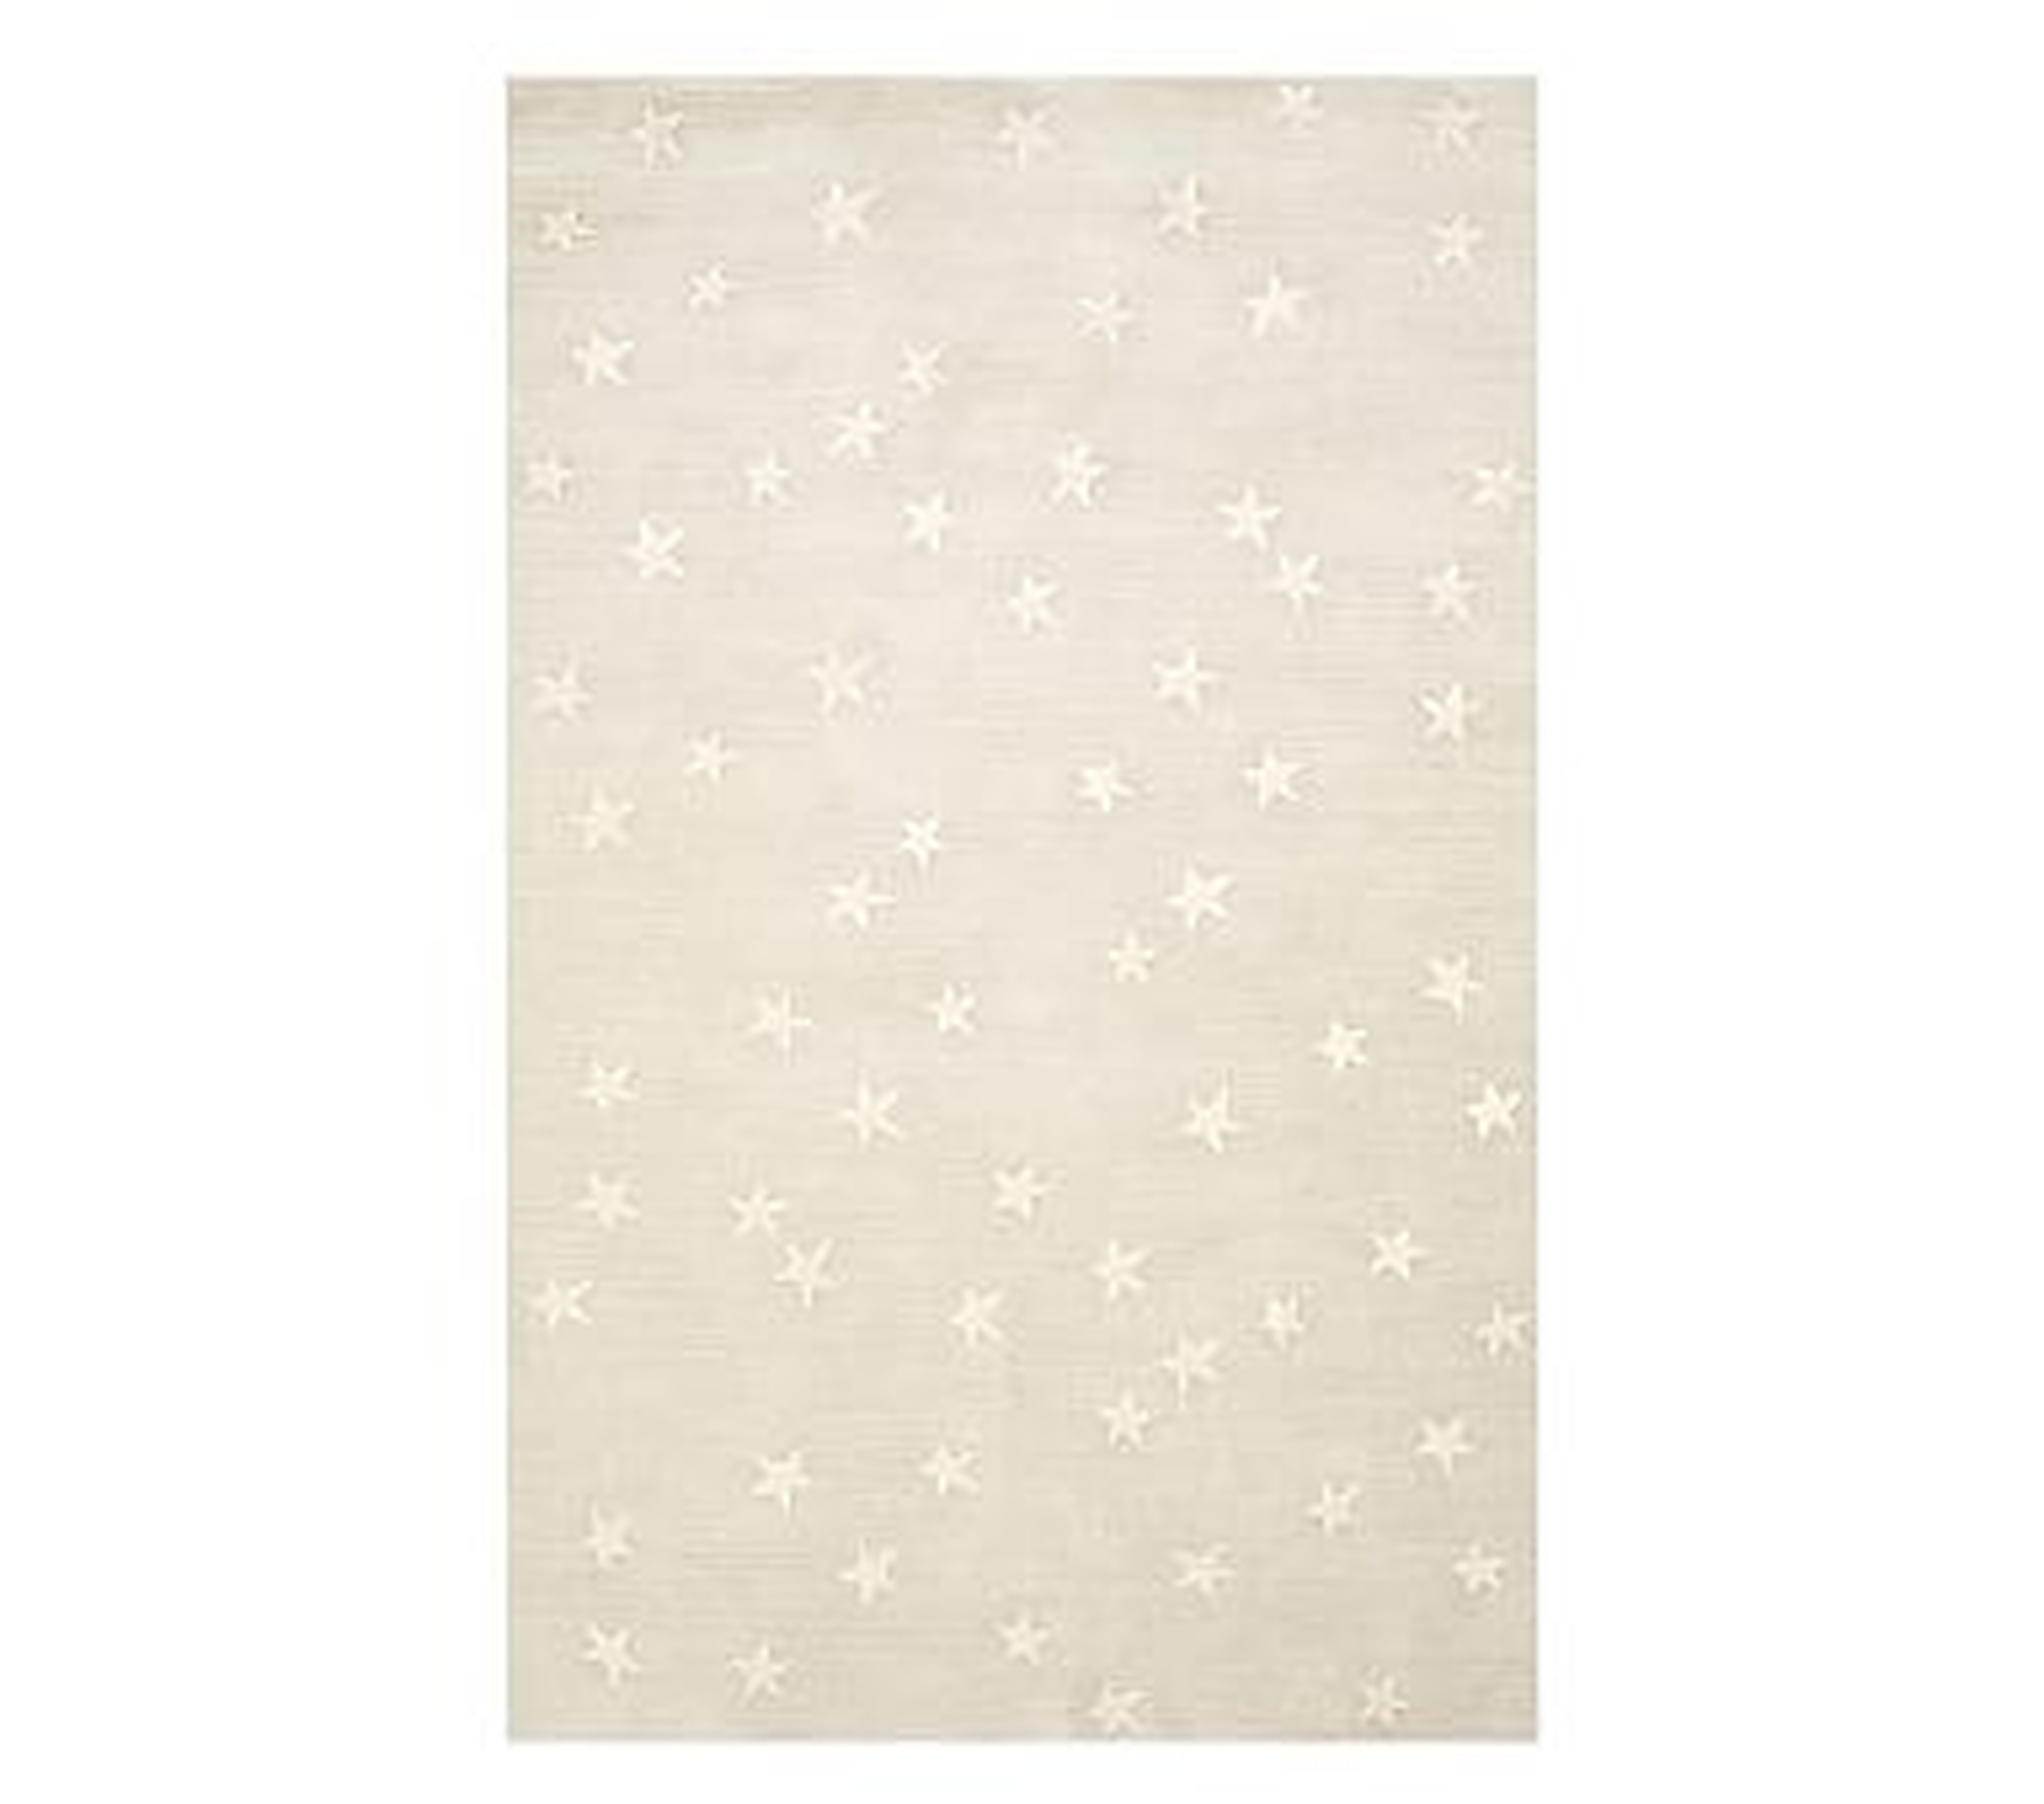 Starry Skies Rug, 5x8', Natural - Pottery Barn Kids